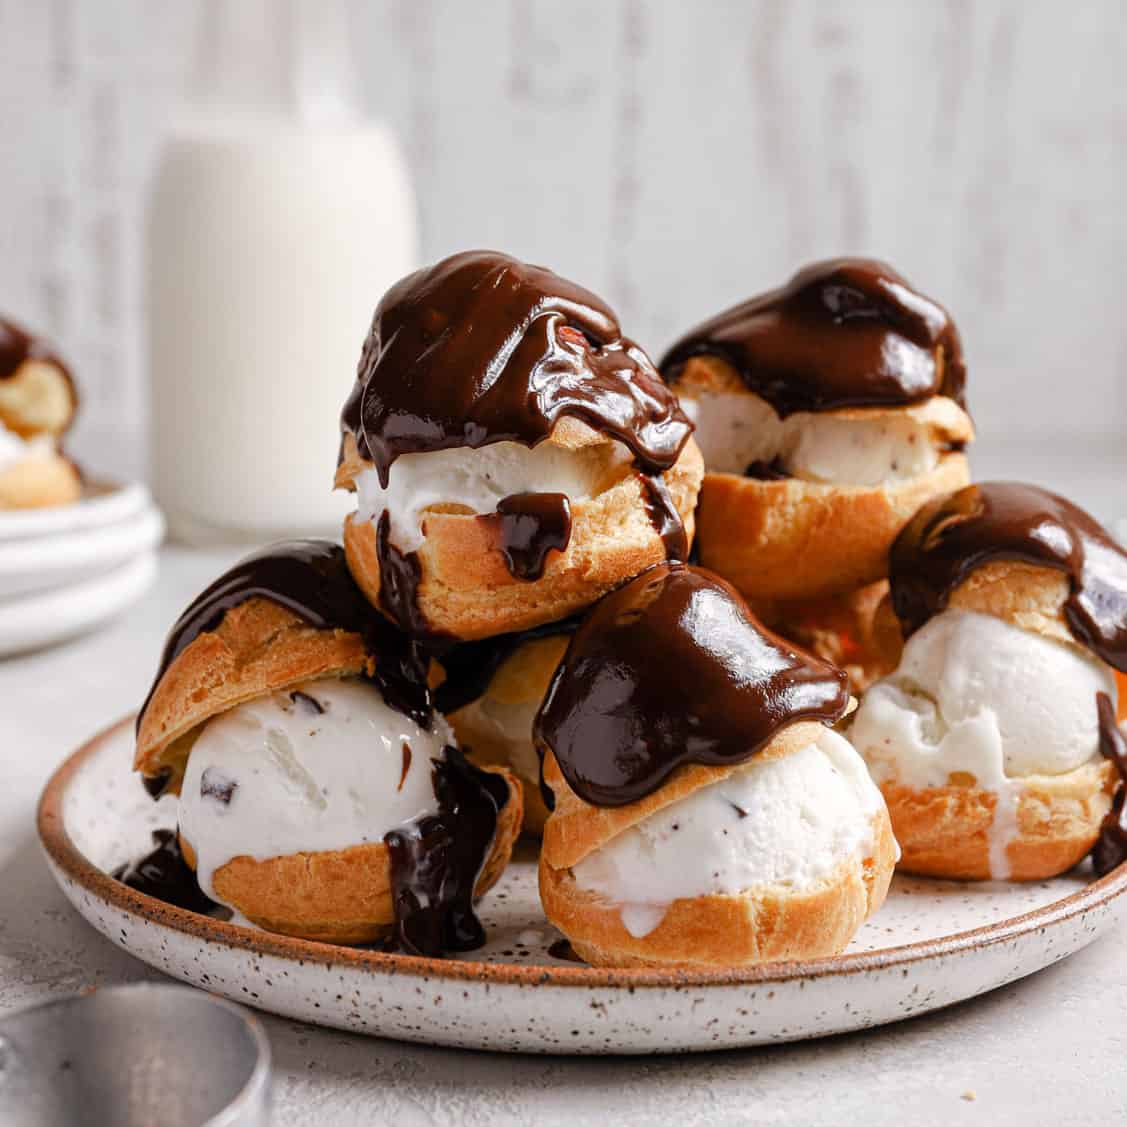 A stack of profiteroles with ice cream filling covered in chocolate sauce.